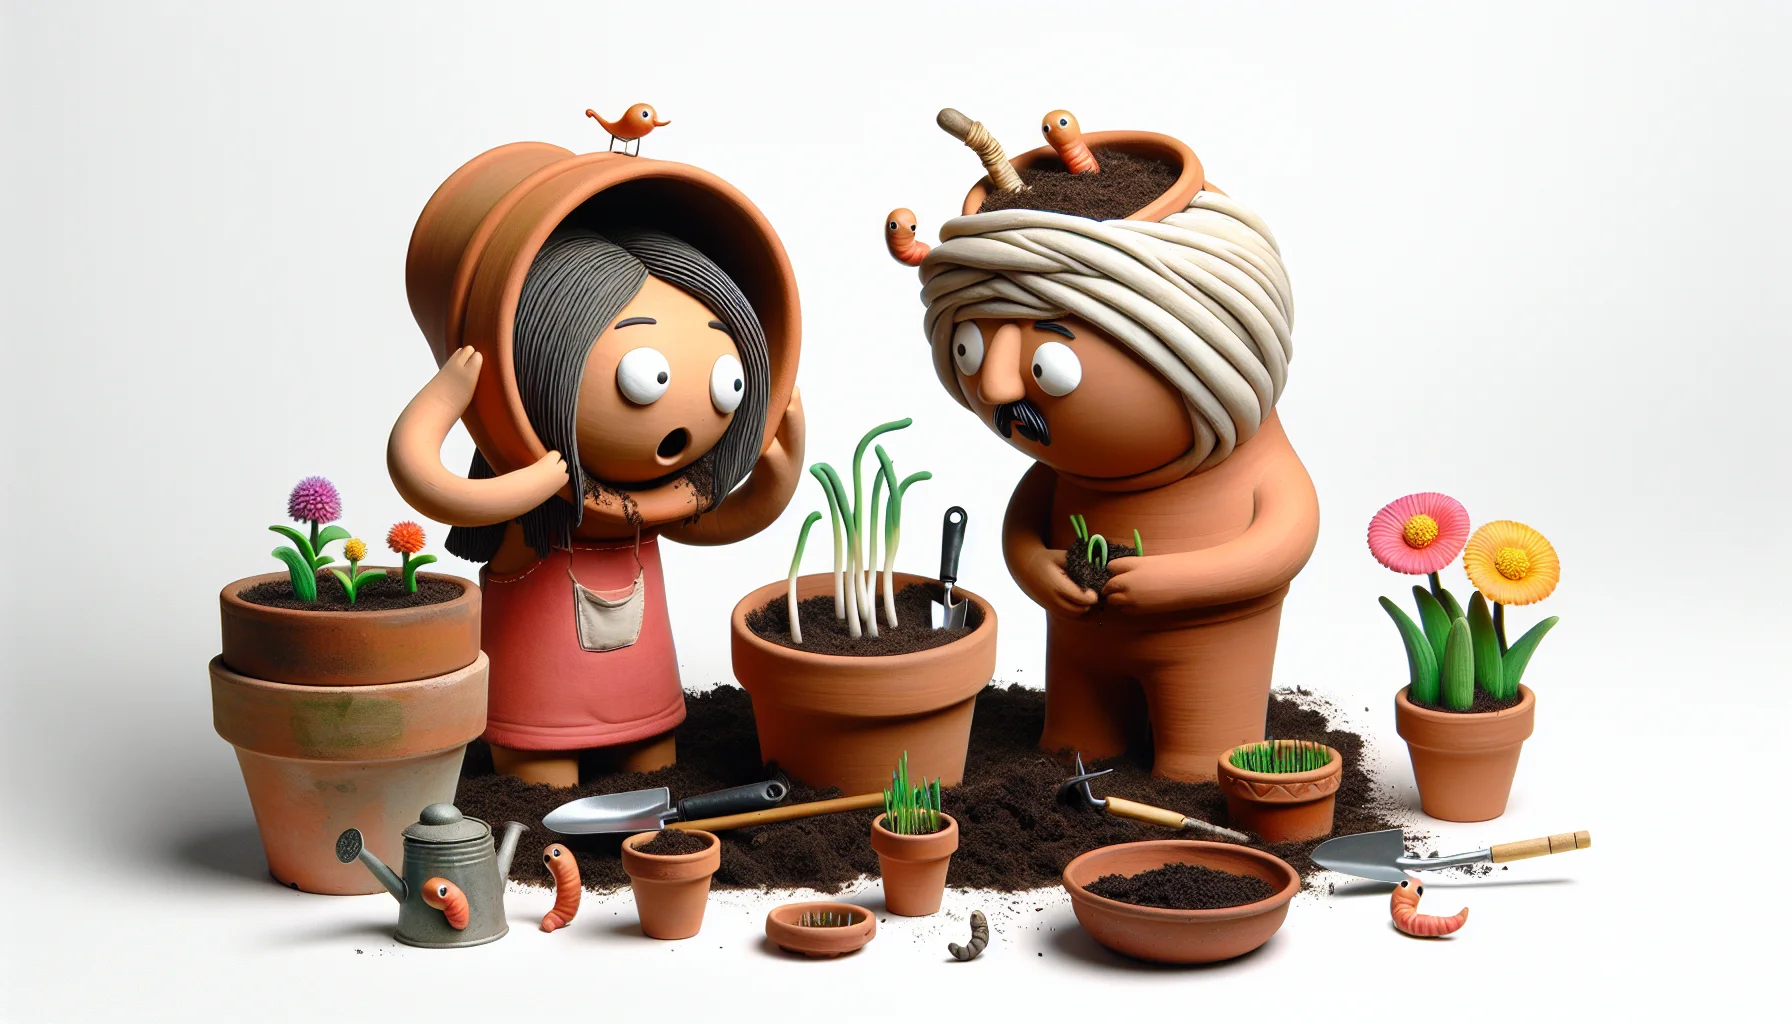 Generate an imaginatively funny and realistic scene featuring Terra Cotta Pot People encouraging gardening. Picture this: an Asian female and a Middle-Eastern male Terra Cotta Pot person are attempting to plant seeds in one another's headpots instead of the potting soil by their side. Add subtle details like tiny gardening tools, sprouts in some pots, multicolored flowering plants around, and perhaps a bemused Earthworm inspecting their antics. The playful representation should inspire people to appreciate and enjoy the process of gardening.